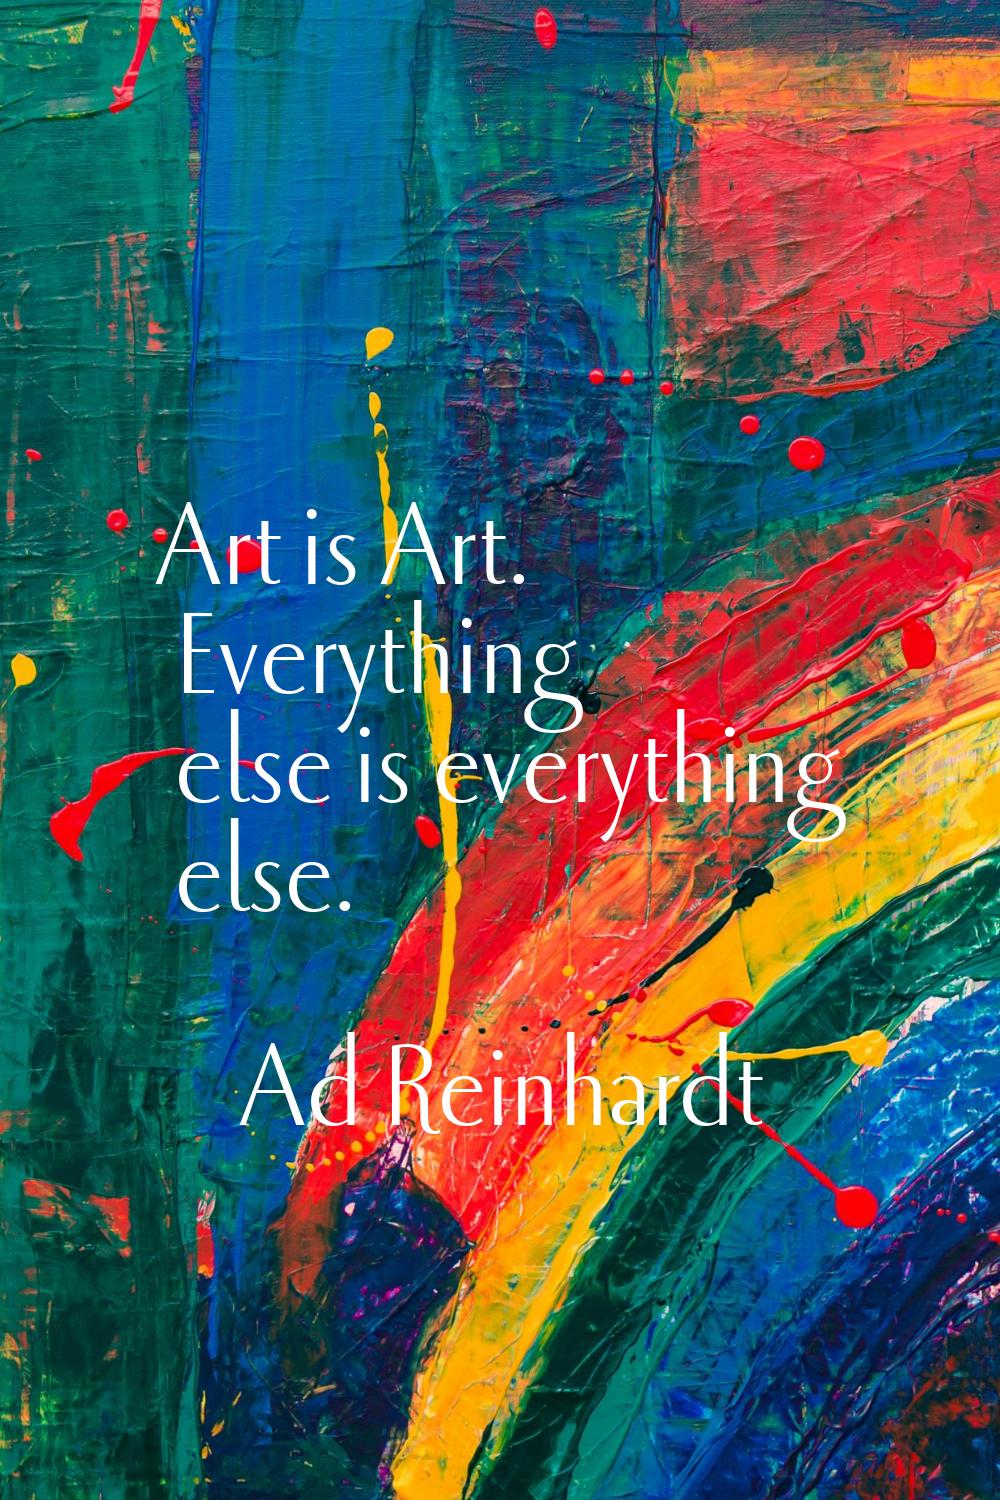 Art is Art. Everything else is everything else.